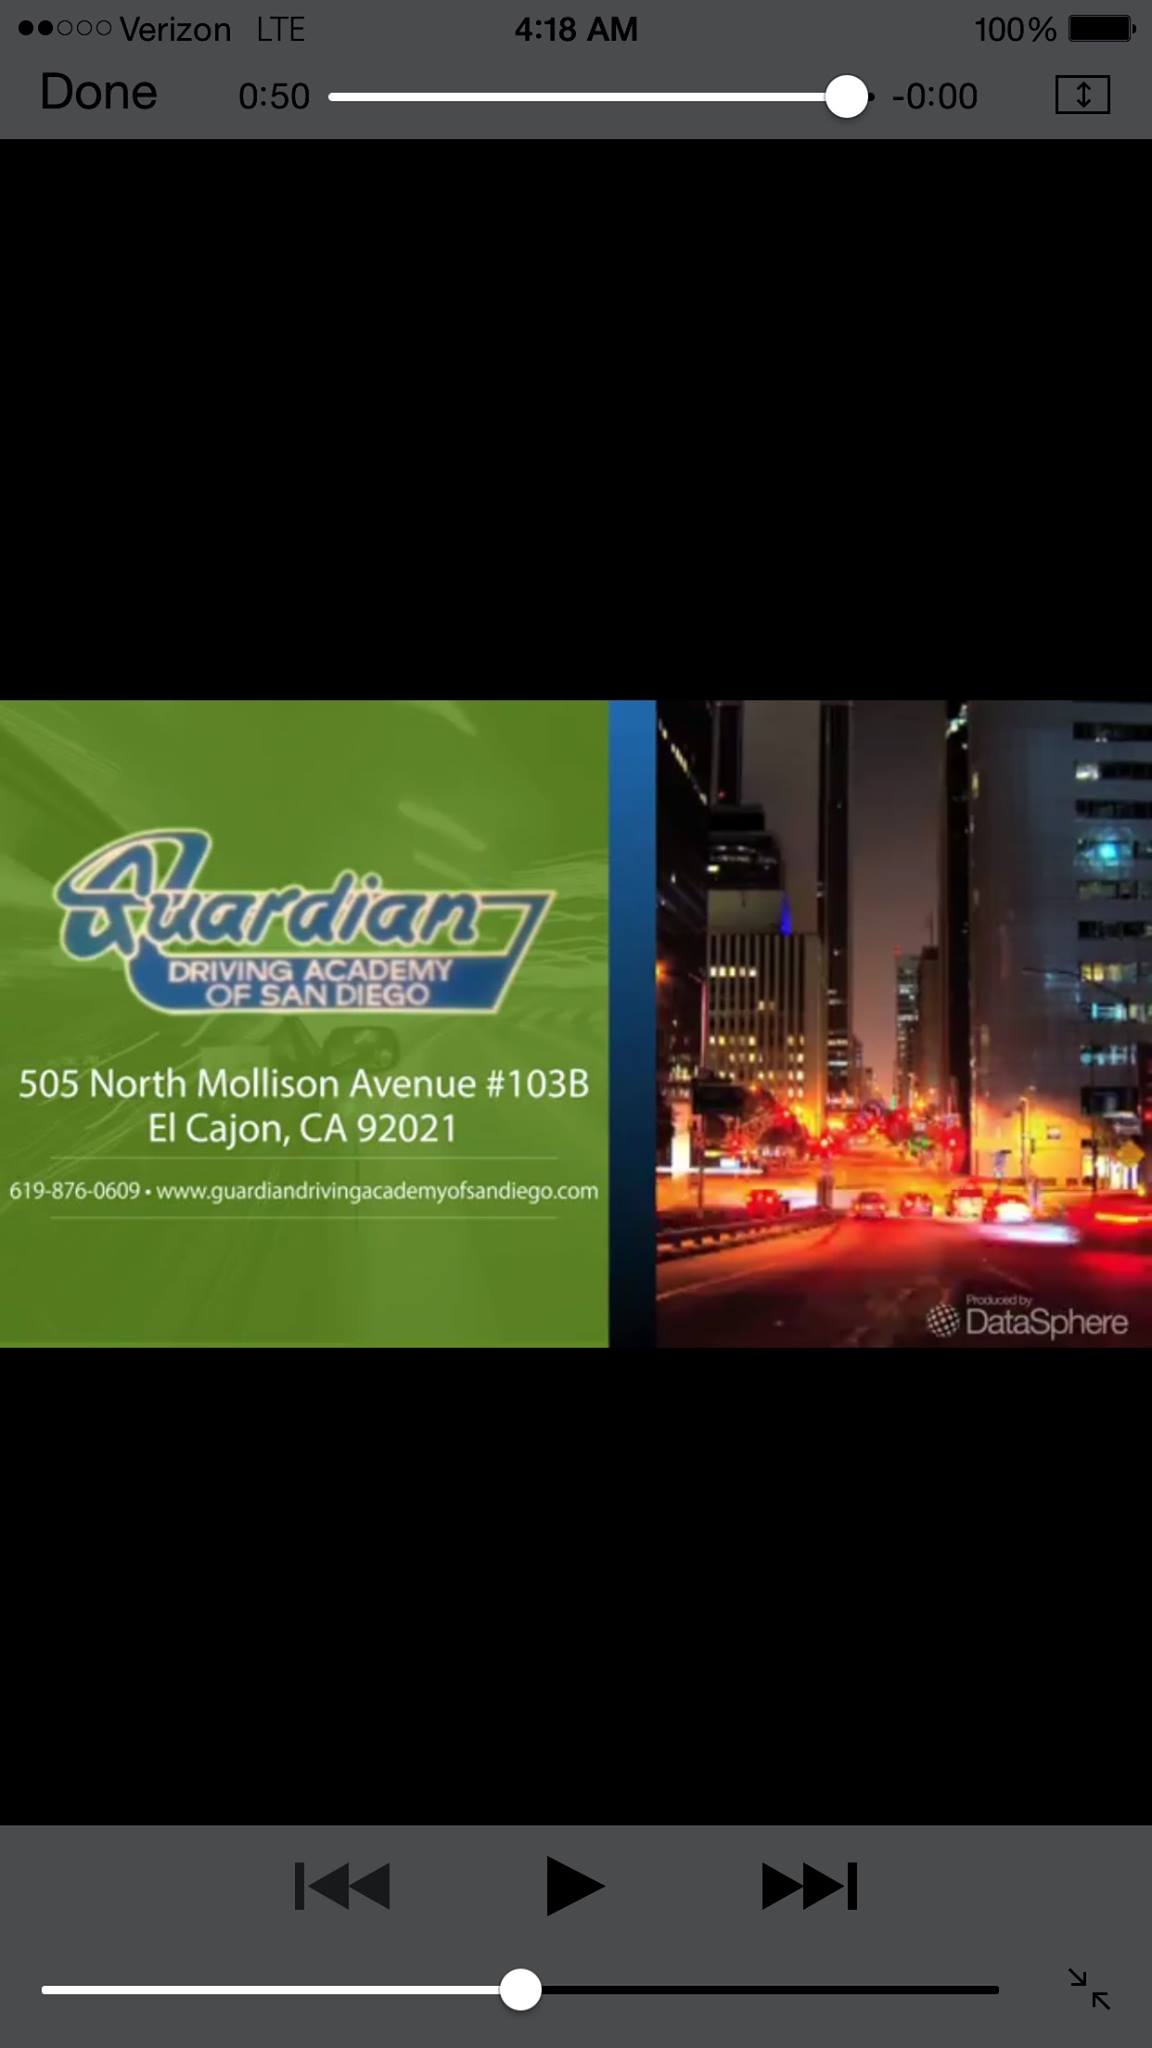 Guardian Driving Academy of San Diego